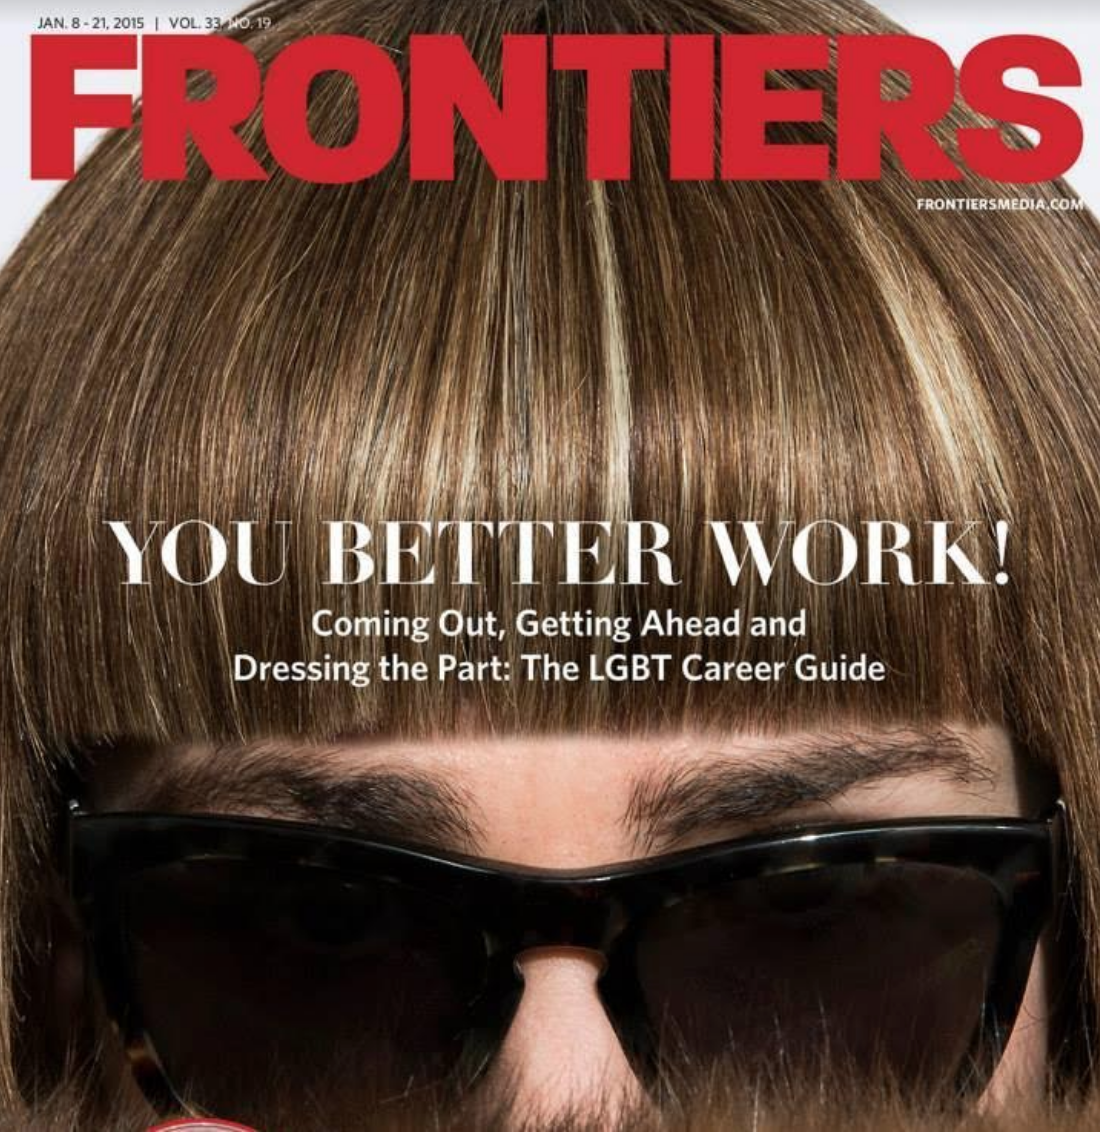 Frontiers Magazine cover featuring Ryan Raftery - photo by Andrew Werner.png